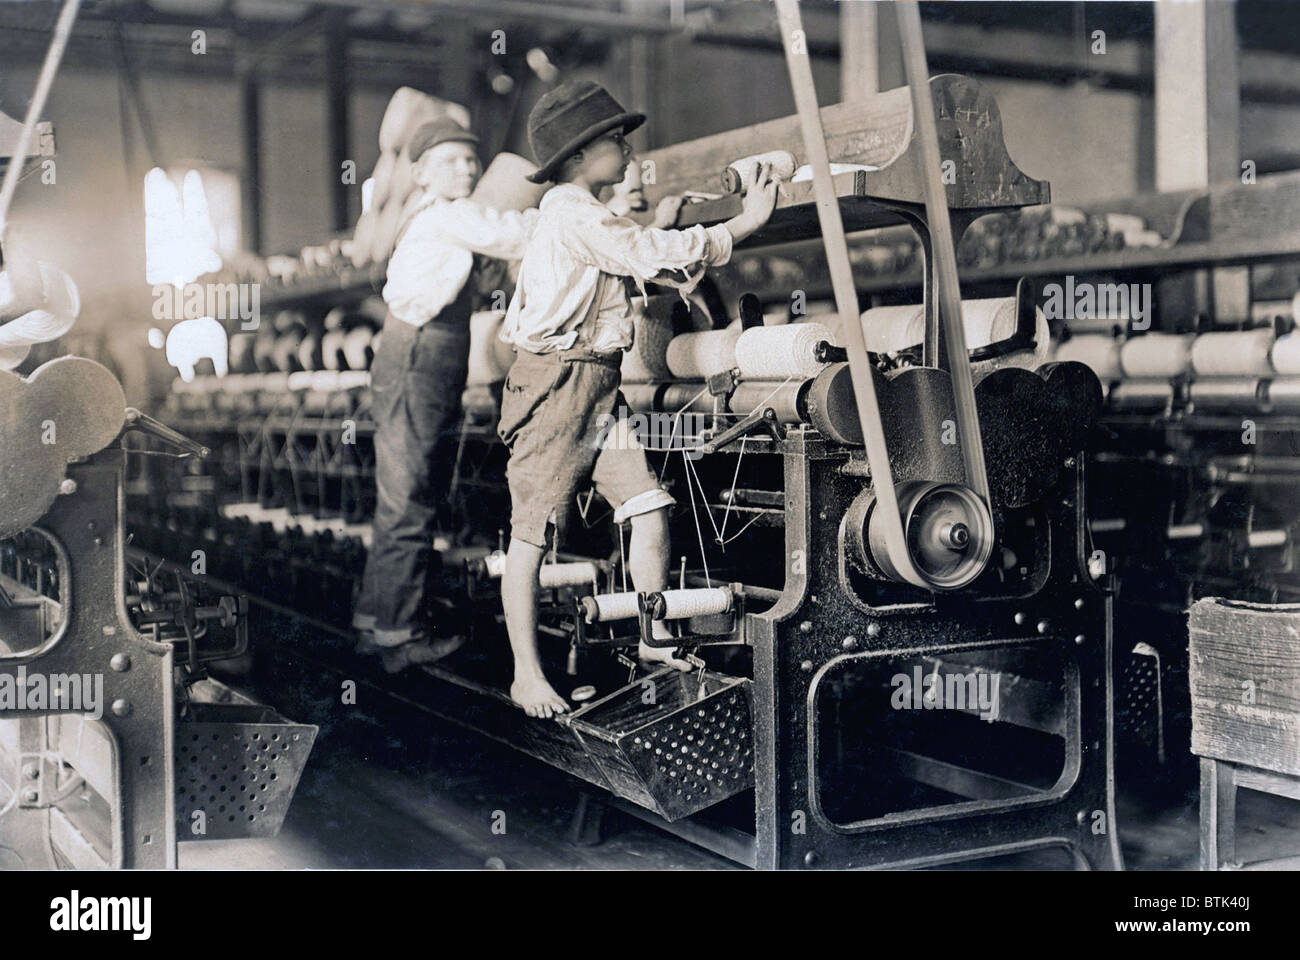 Child laborer portrayed by Lewis Hine in 1909. The barefooted boy in a George cotton mill was so small he had to climb up on the spinning frame to mend the broken threads and put back the empty bobbins. Stock Photo